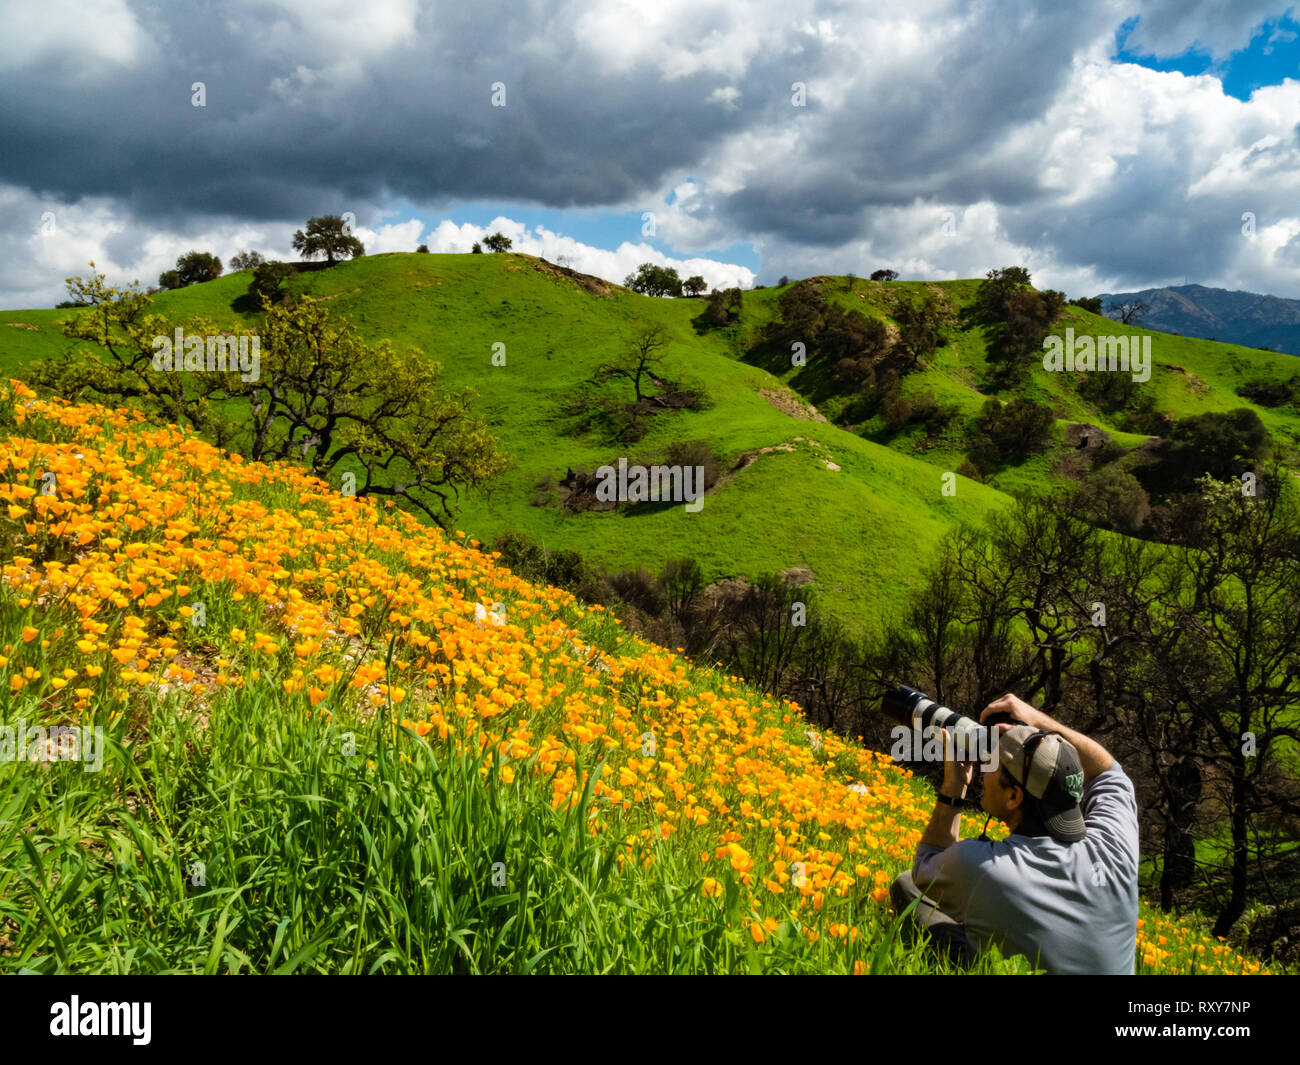 A photographer enjoys the huge fields of California poppies in Malibu Creek State Park, Los Angeles, California after the disastrous Woolsey fire. Stock Photo